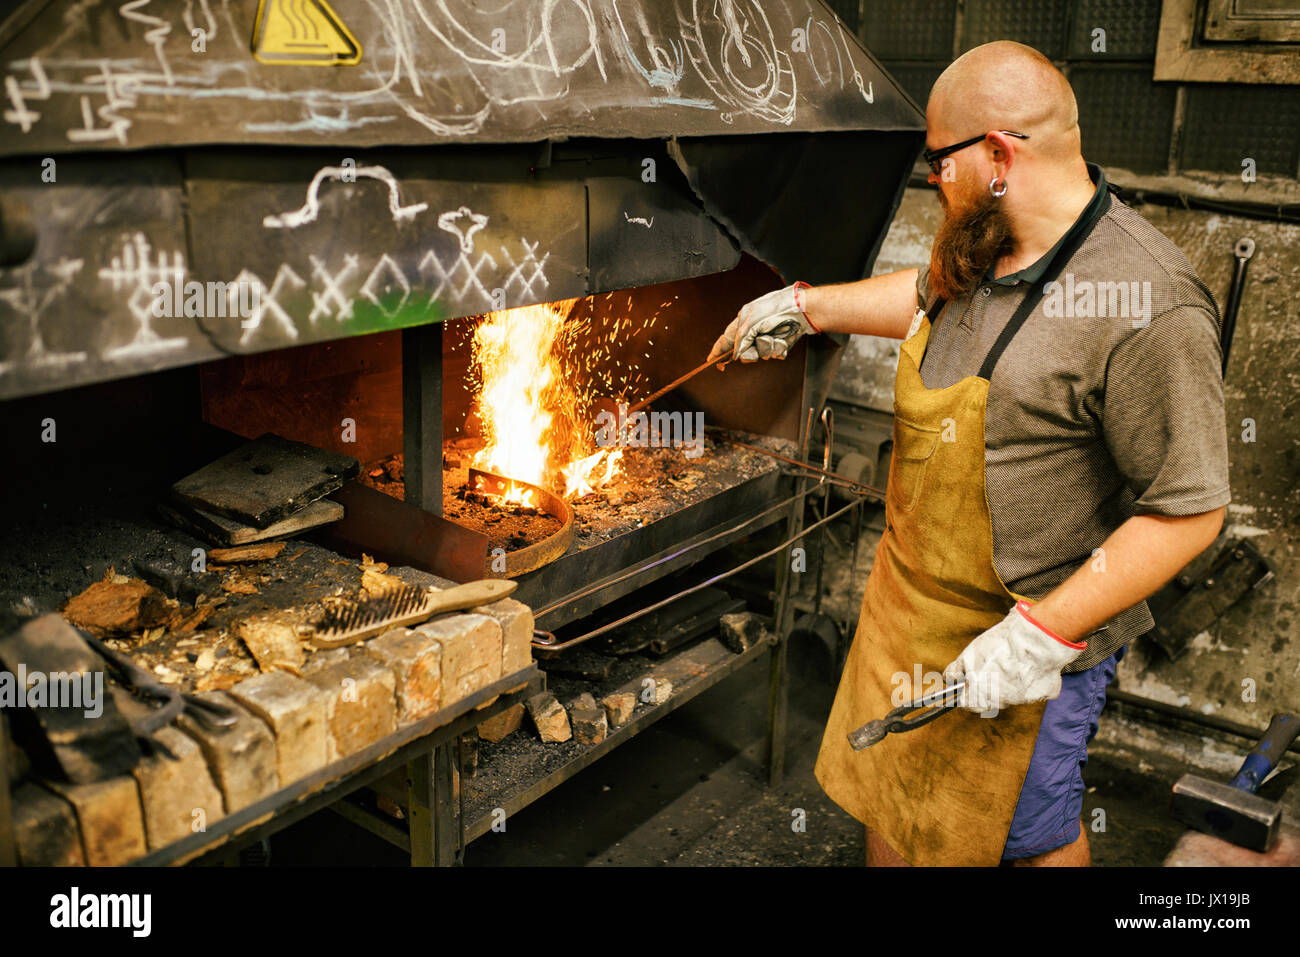 Blacksmith with beard working in his workshop Stock Photo